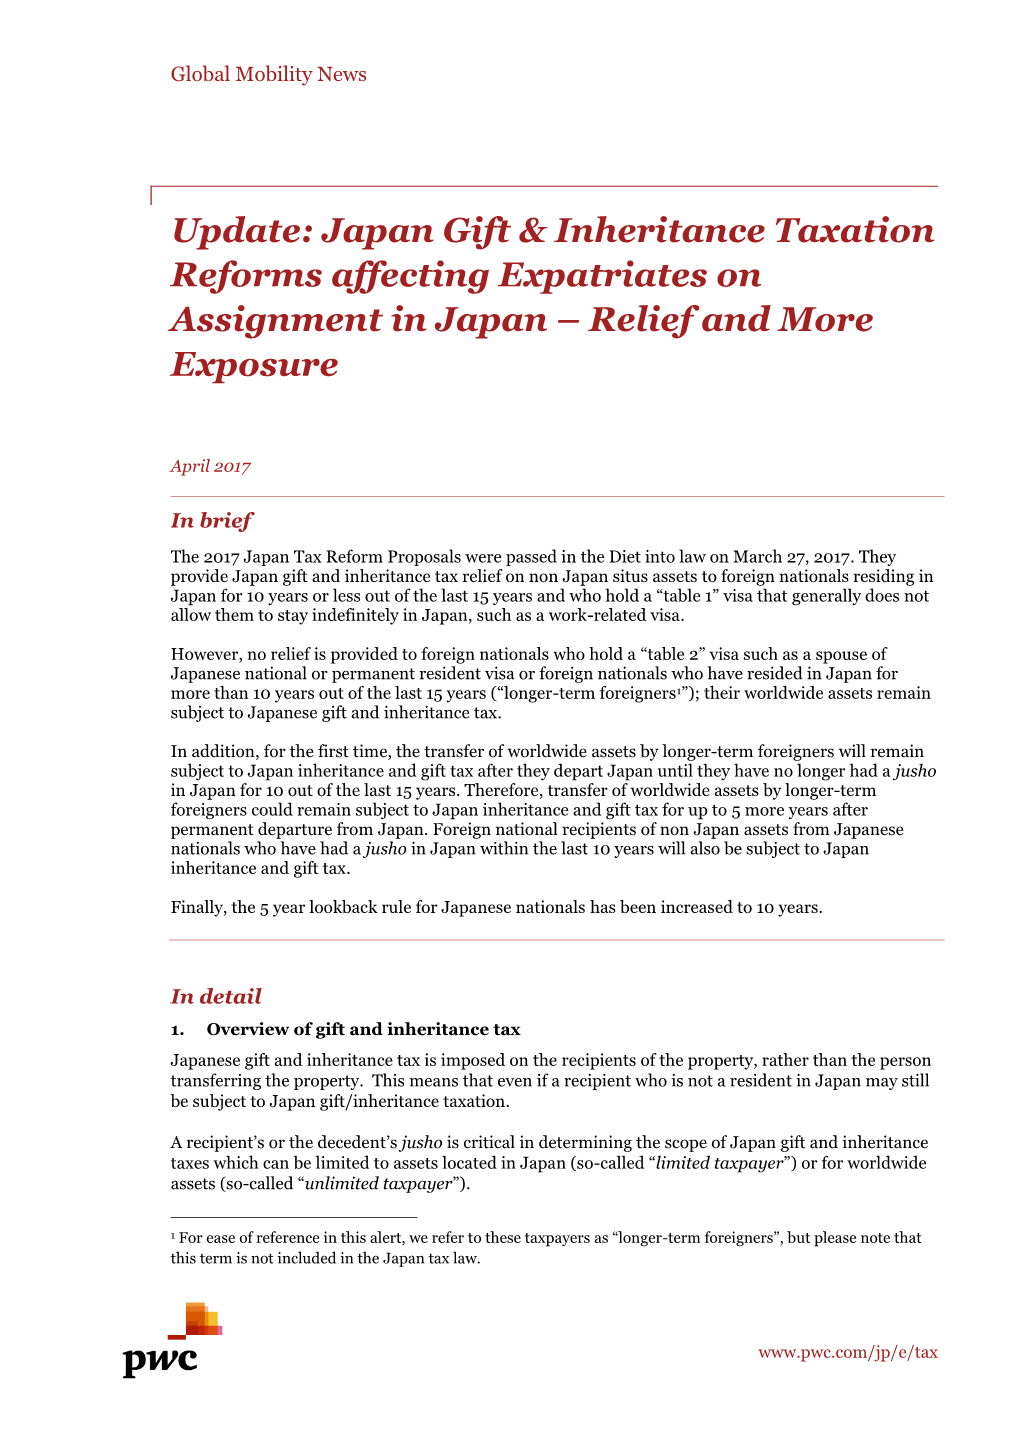 Update: Japan Gift & Inheritance Taxation Reforms Affecting Expatriates on Assignment in Japan – Relief and More Exposure